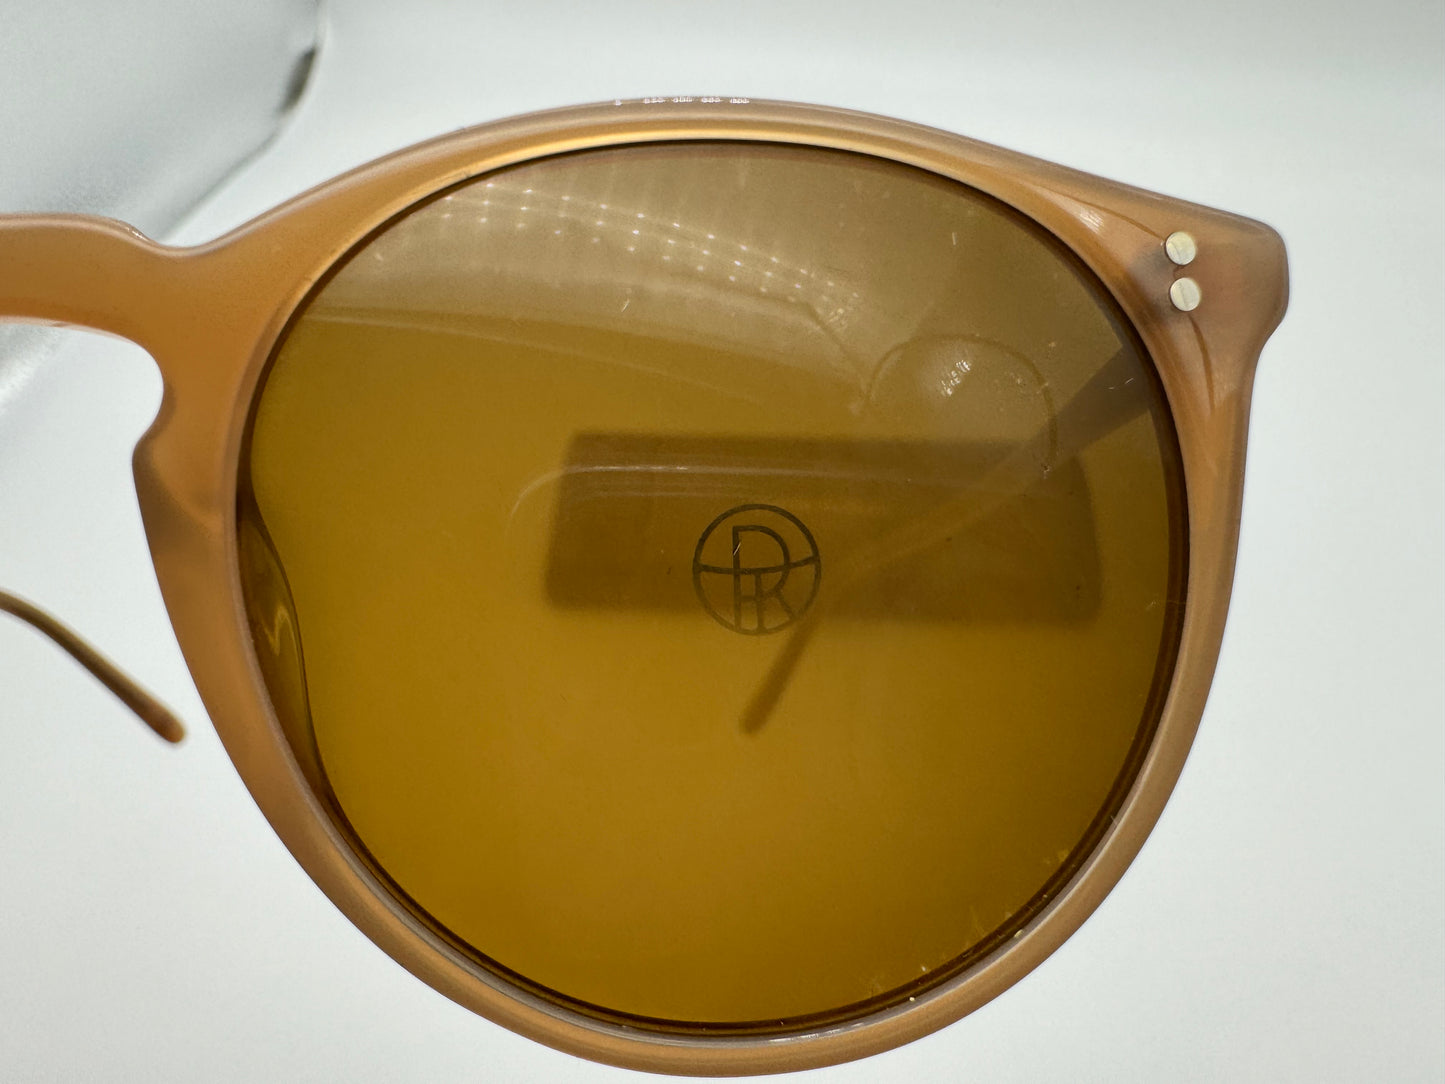 Oliver Peoples O'MALLEY 48mm OV 5183 160753 THE ROW  NYC Brown Topaz Preowned